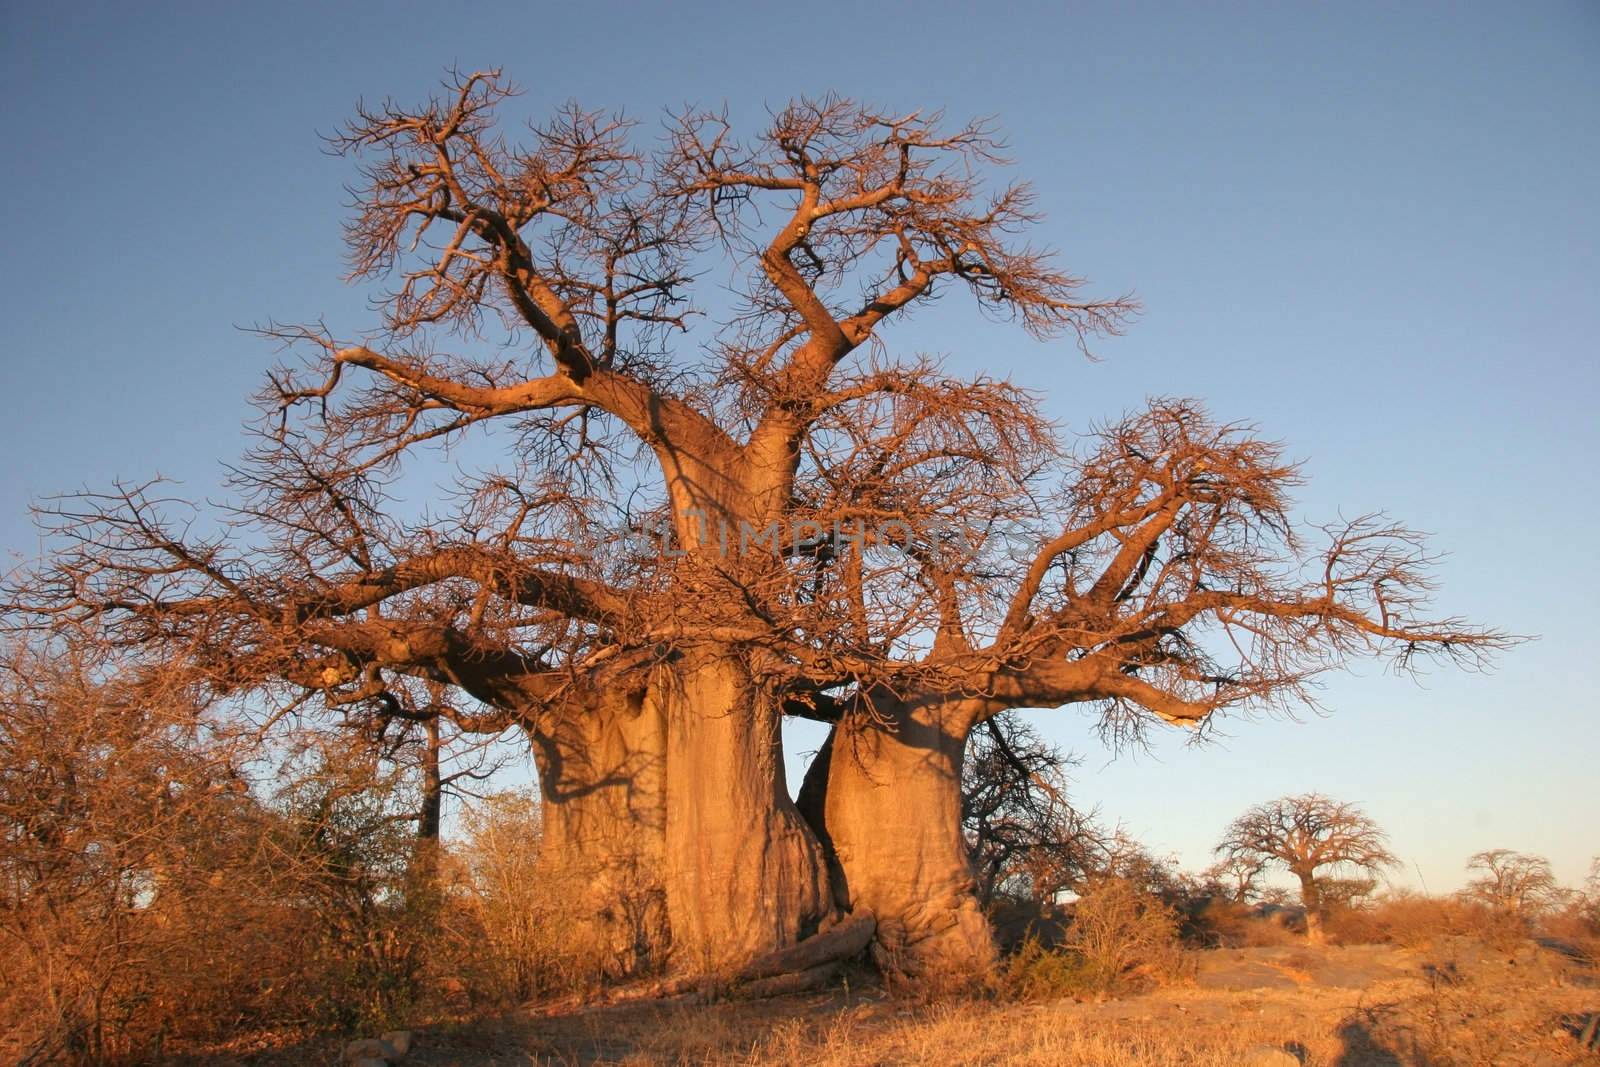 Boabab tree in Botswana, Southern Africa